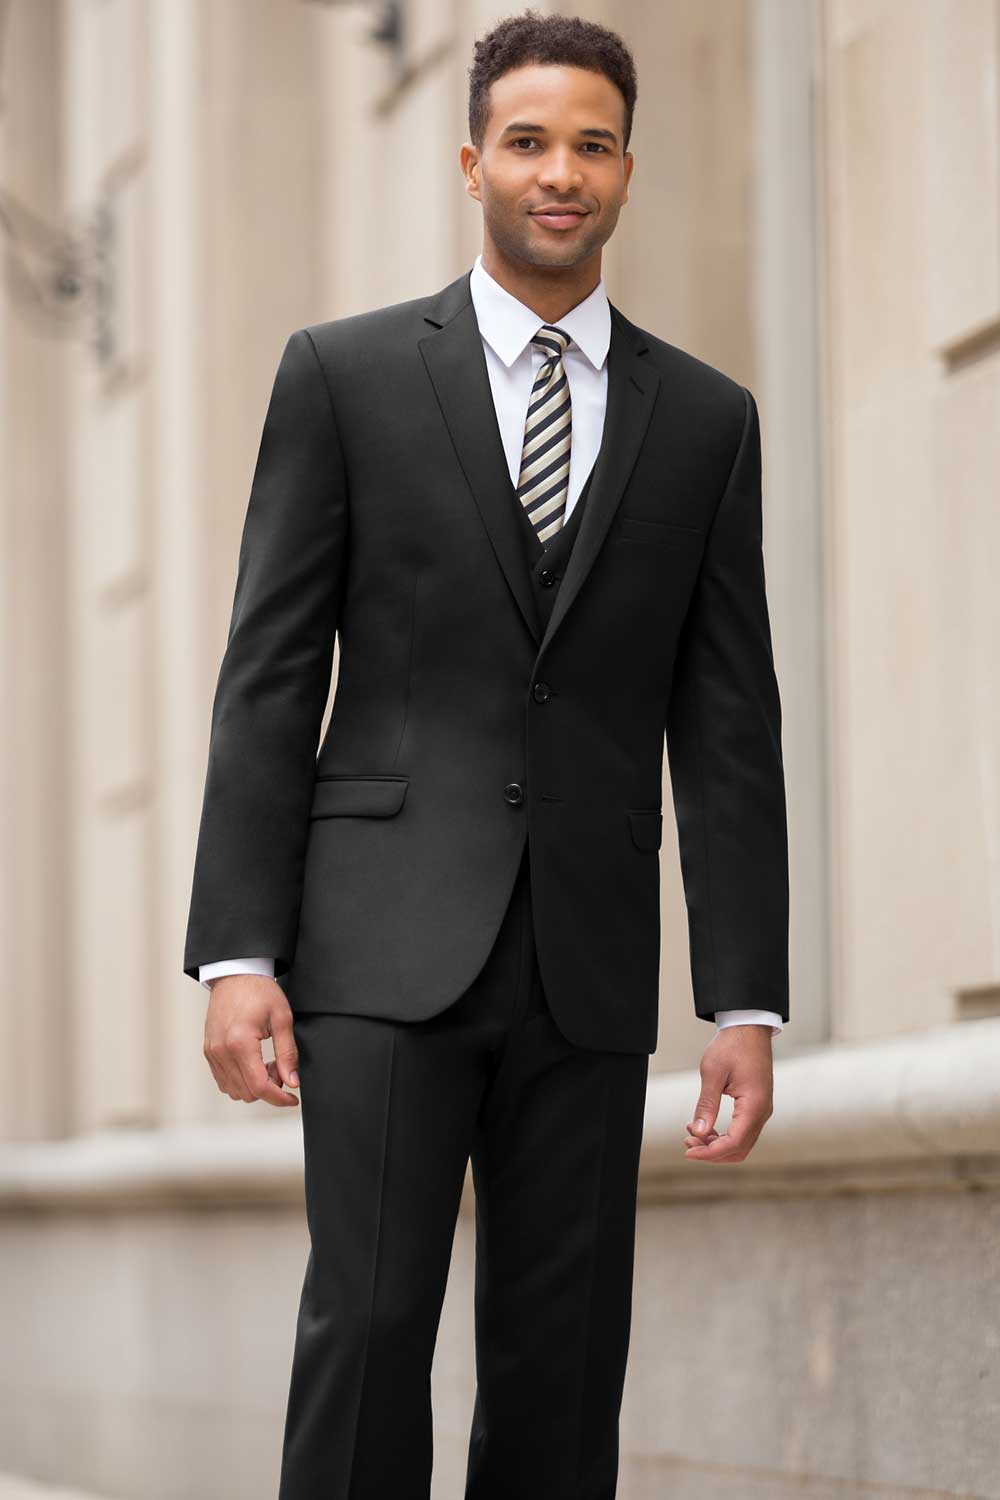 Men's Suit Trousers - Mix & Match your size in various colors and fabrics |  SUITSUPPLY Singapore